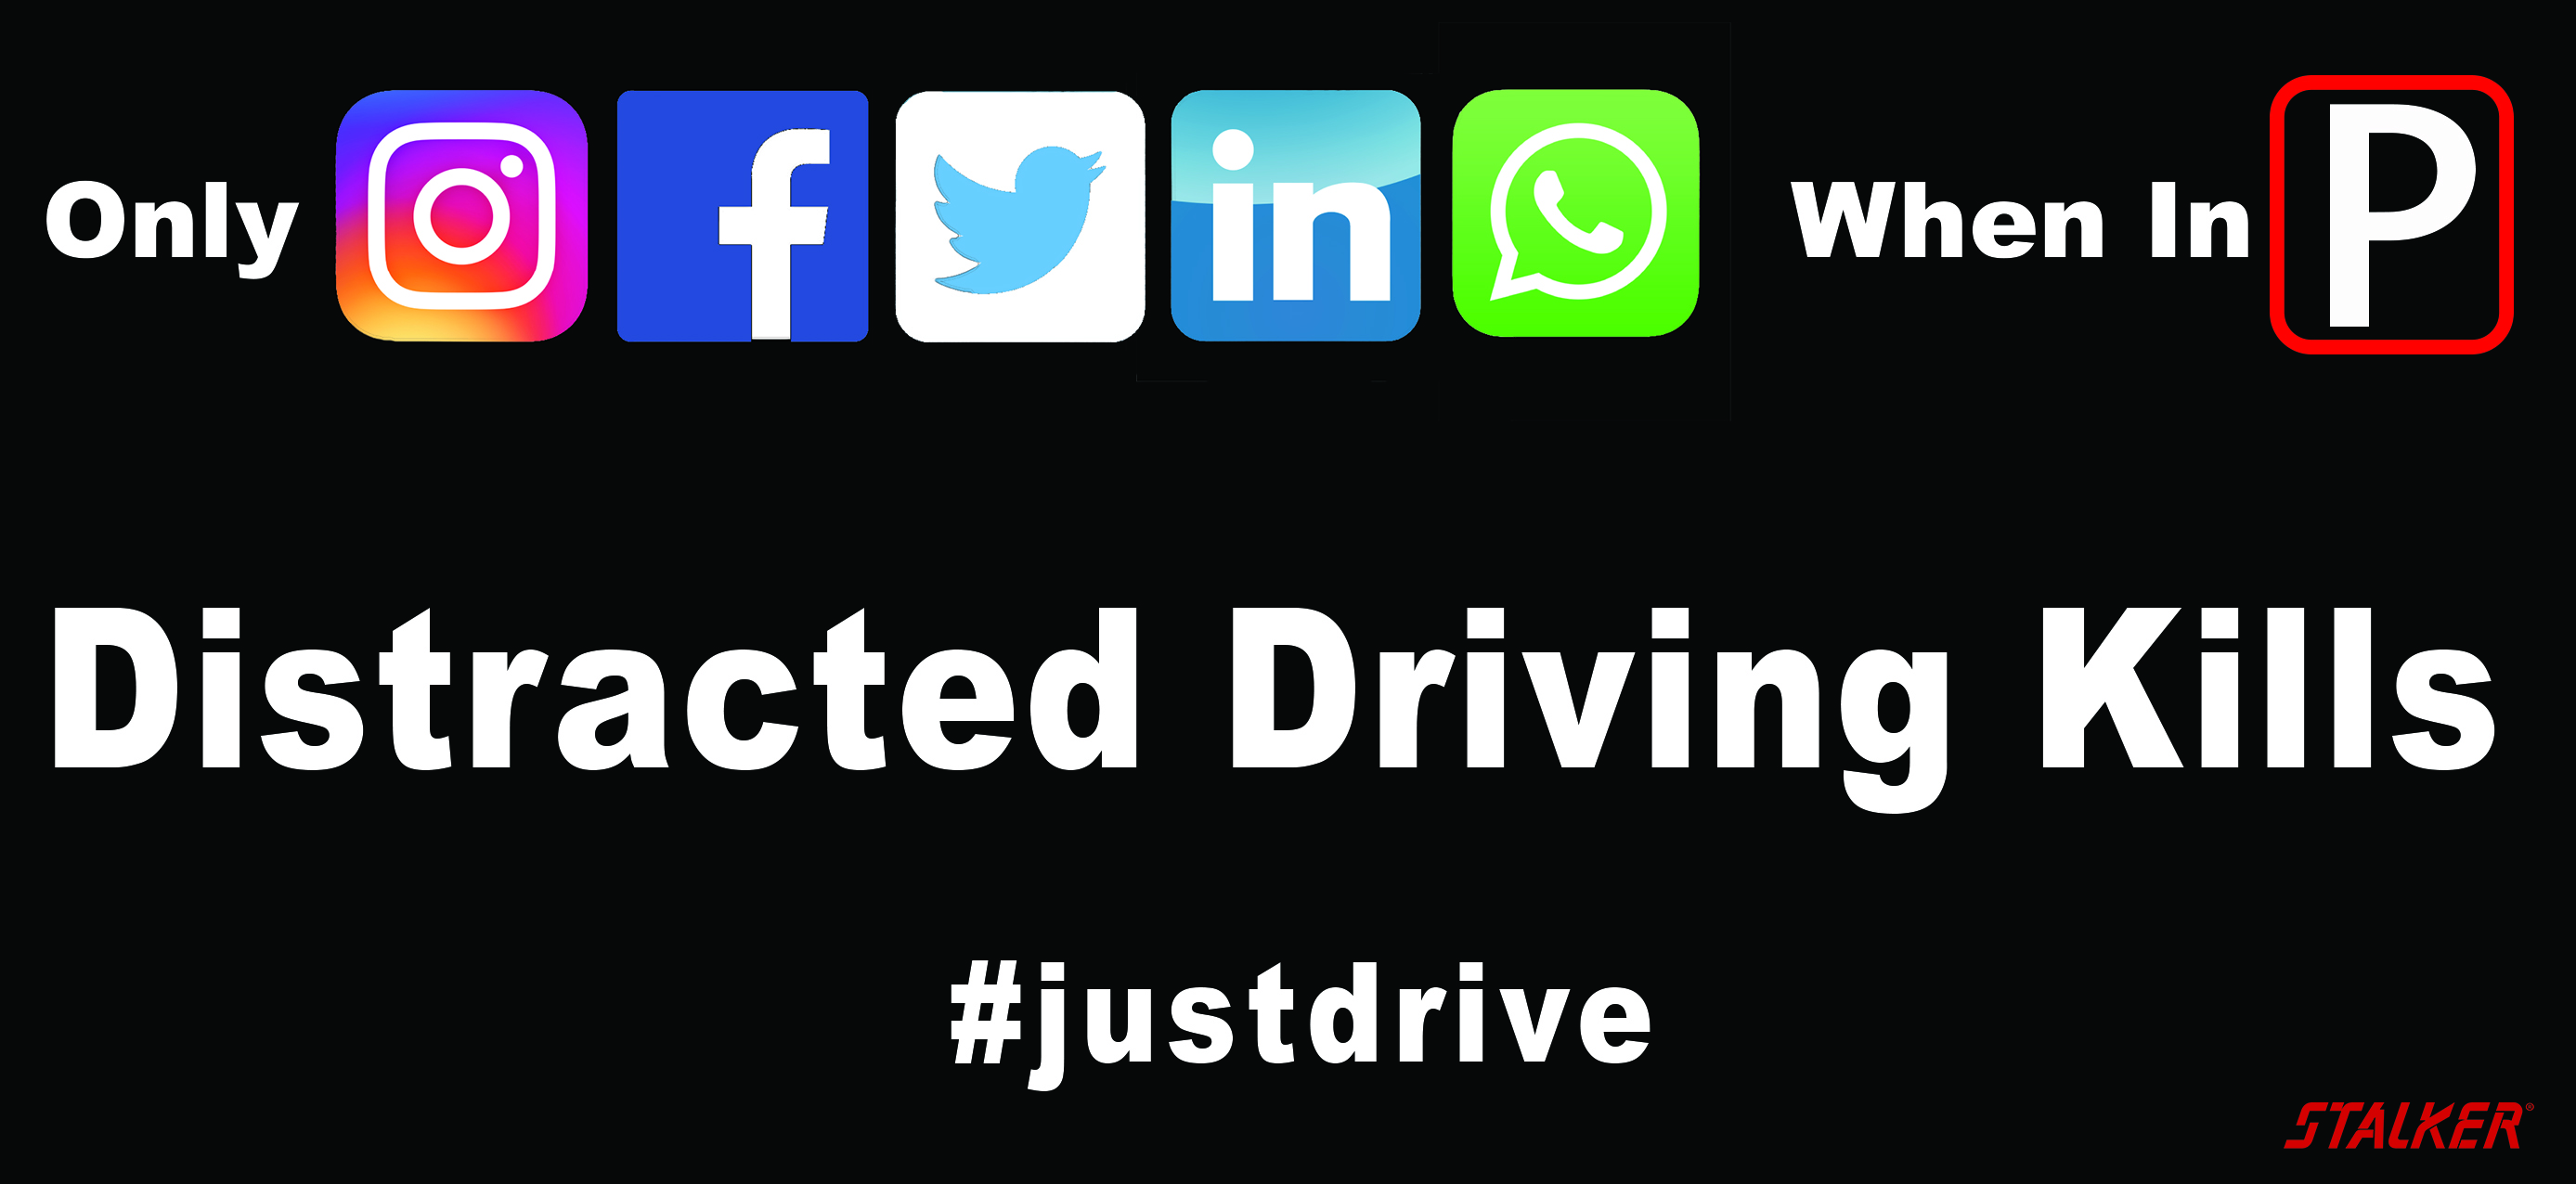 Help stop Distracted Driving #justdrive